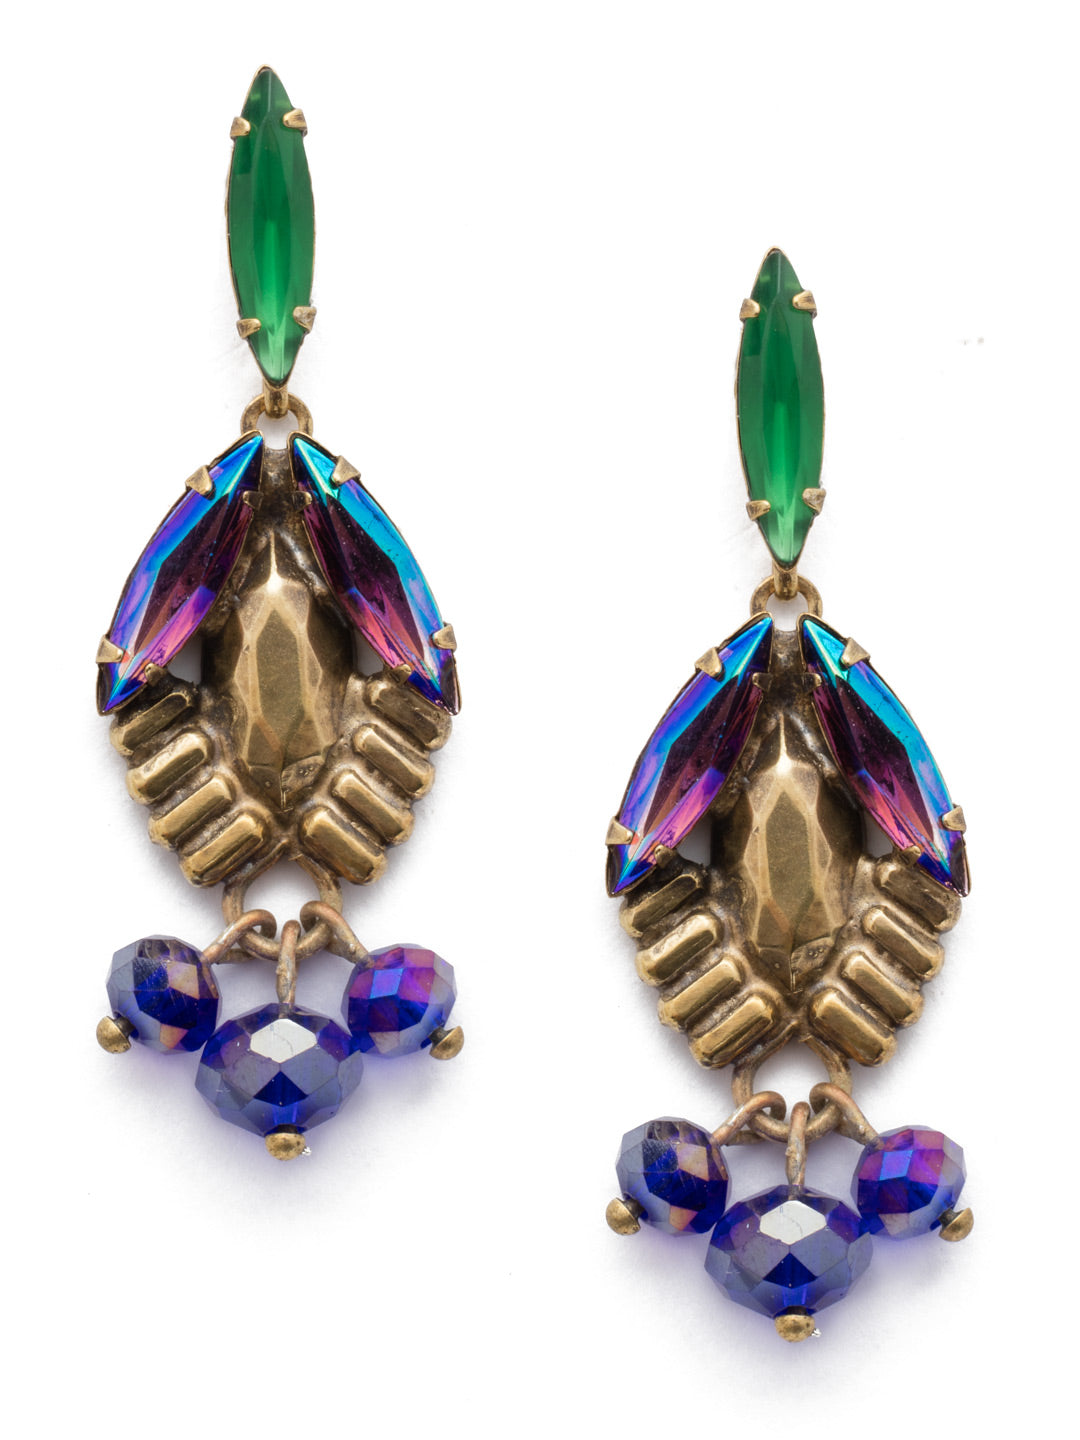 Lillie Drop Earring - EEF4AGGOT - Adorn your ears with theses sparkling statement earrings. An array of navette cut crystal embellish these earrings complete with swaying beads at the tips.These are designed to compliment any girls standout style. From Sorrelli's Game of Jewel Tones collection in our Antique Gold-tone finish.